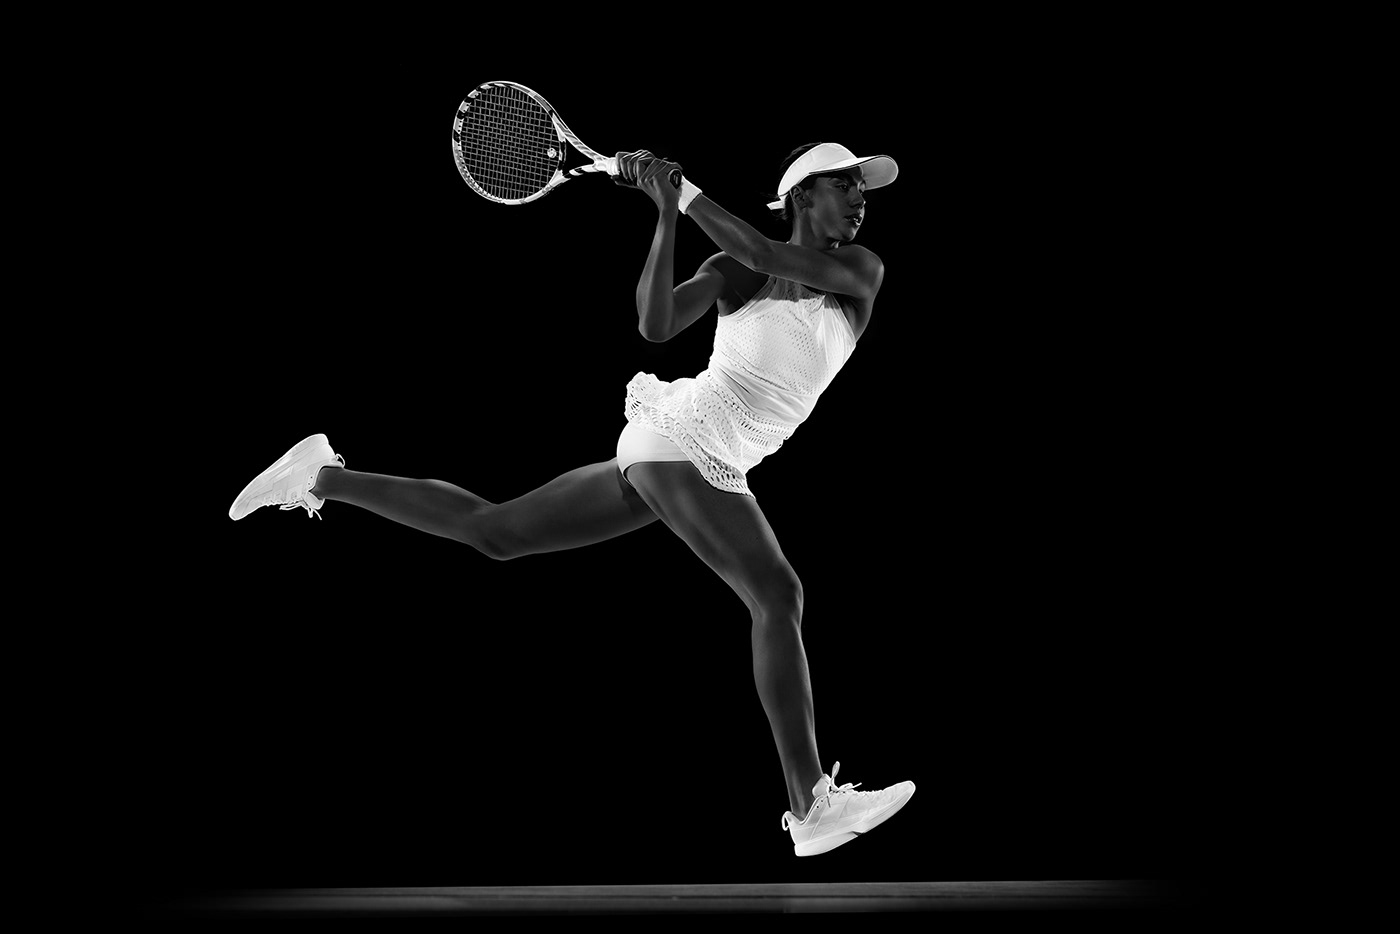 tennis sports black and white action photoshop bw